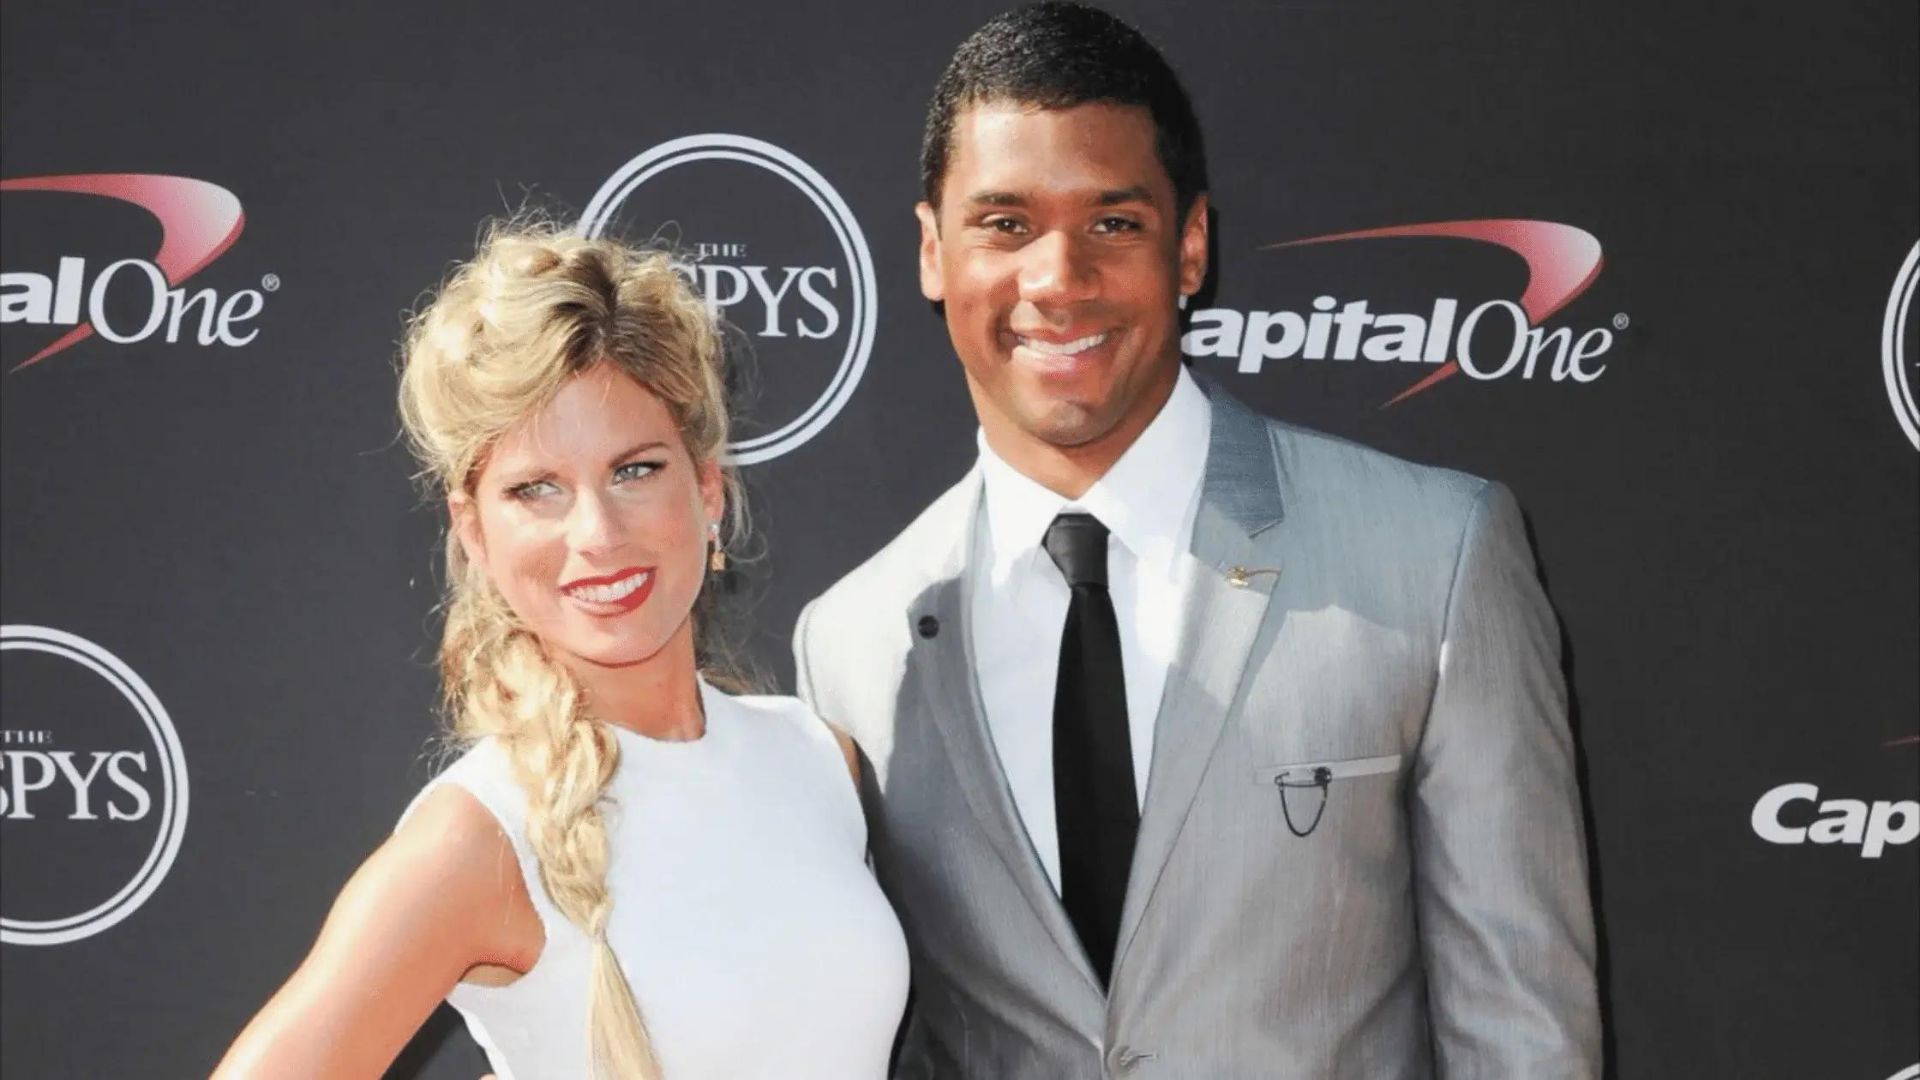 Russell Wilson Ex Wife - Net Worth, Bio, Wiki, Age, Family, Friends, Height & Salary